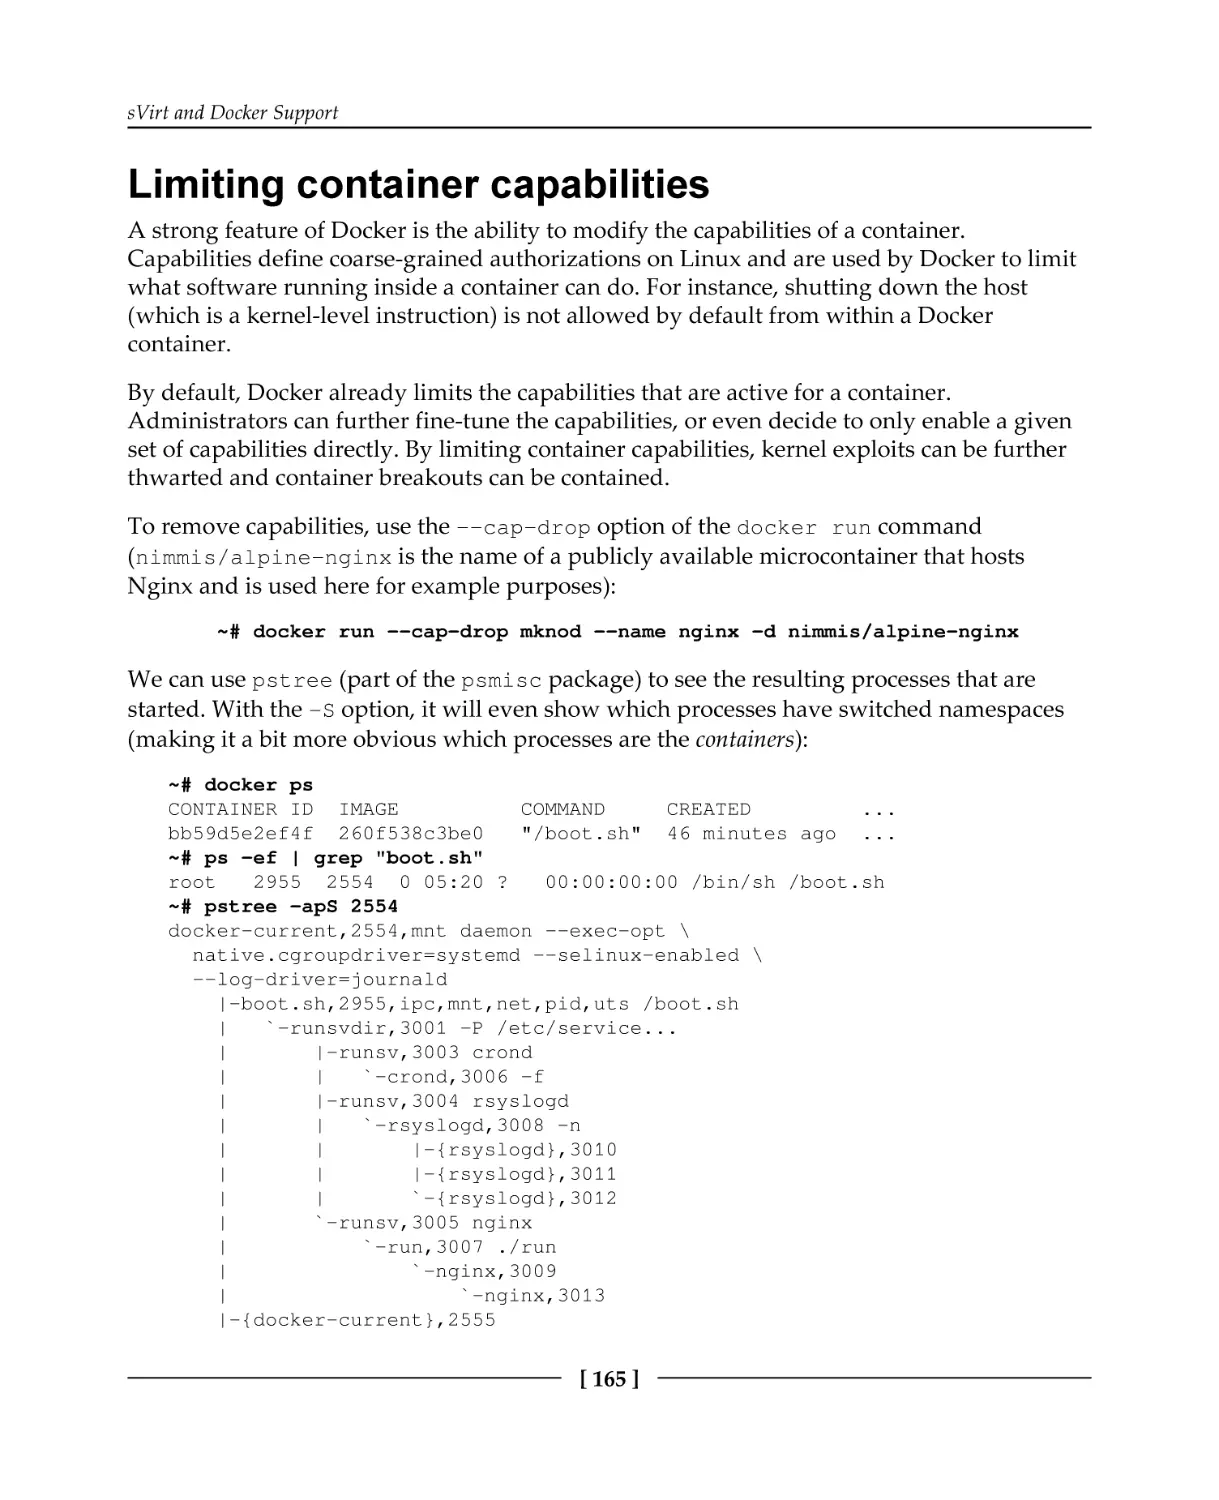 Limiting container capabilities